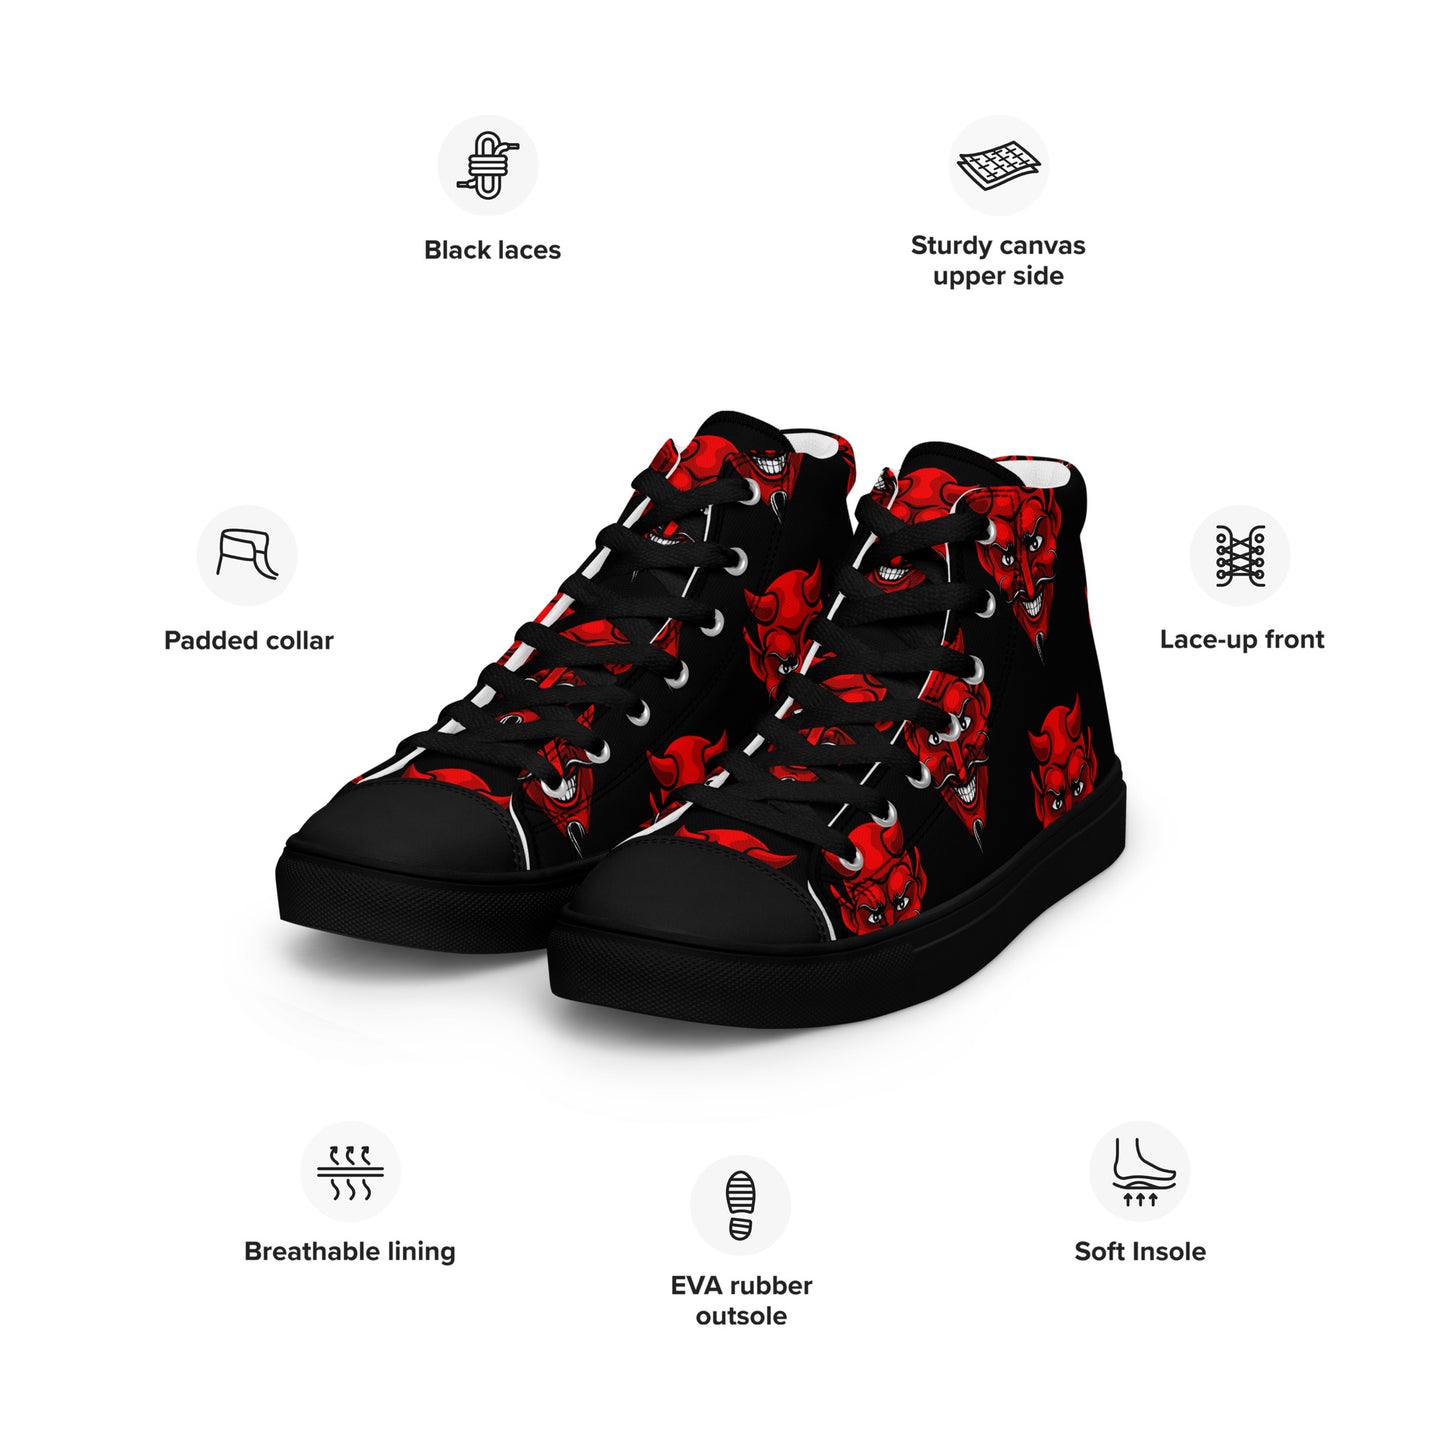 WOMEN'S RED DEVIL HIGH TOP CANVAS SHOES